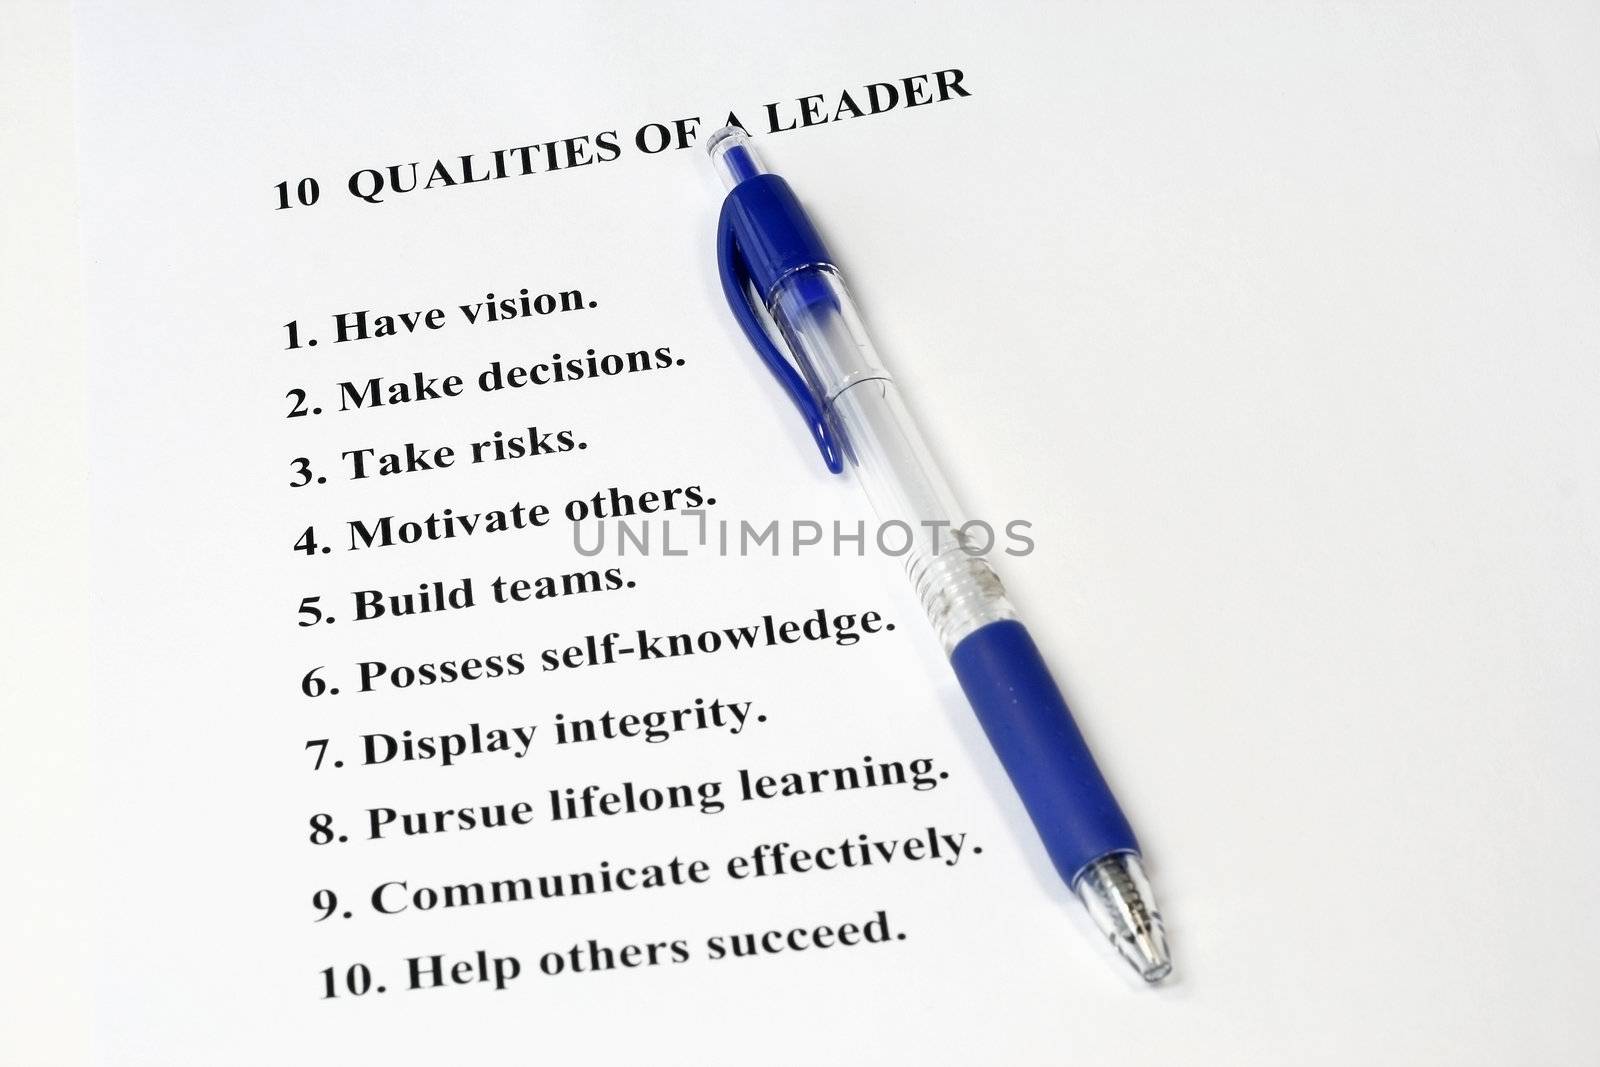 Ten Qualities of a Leader by sacatani